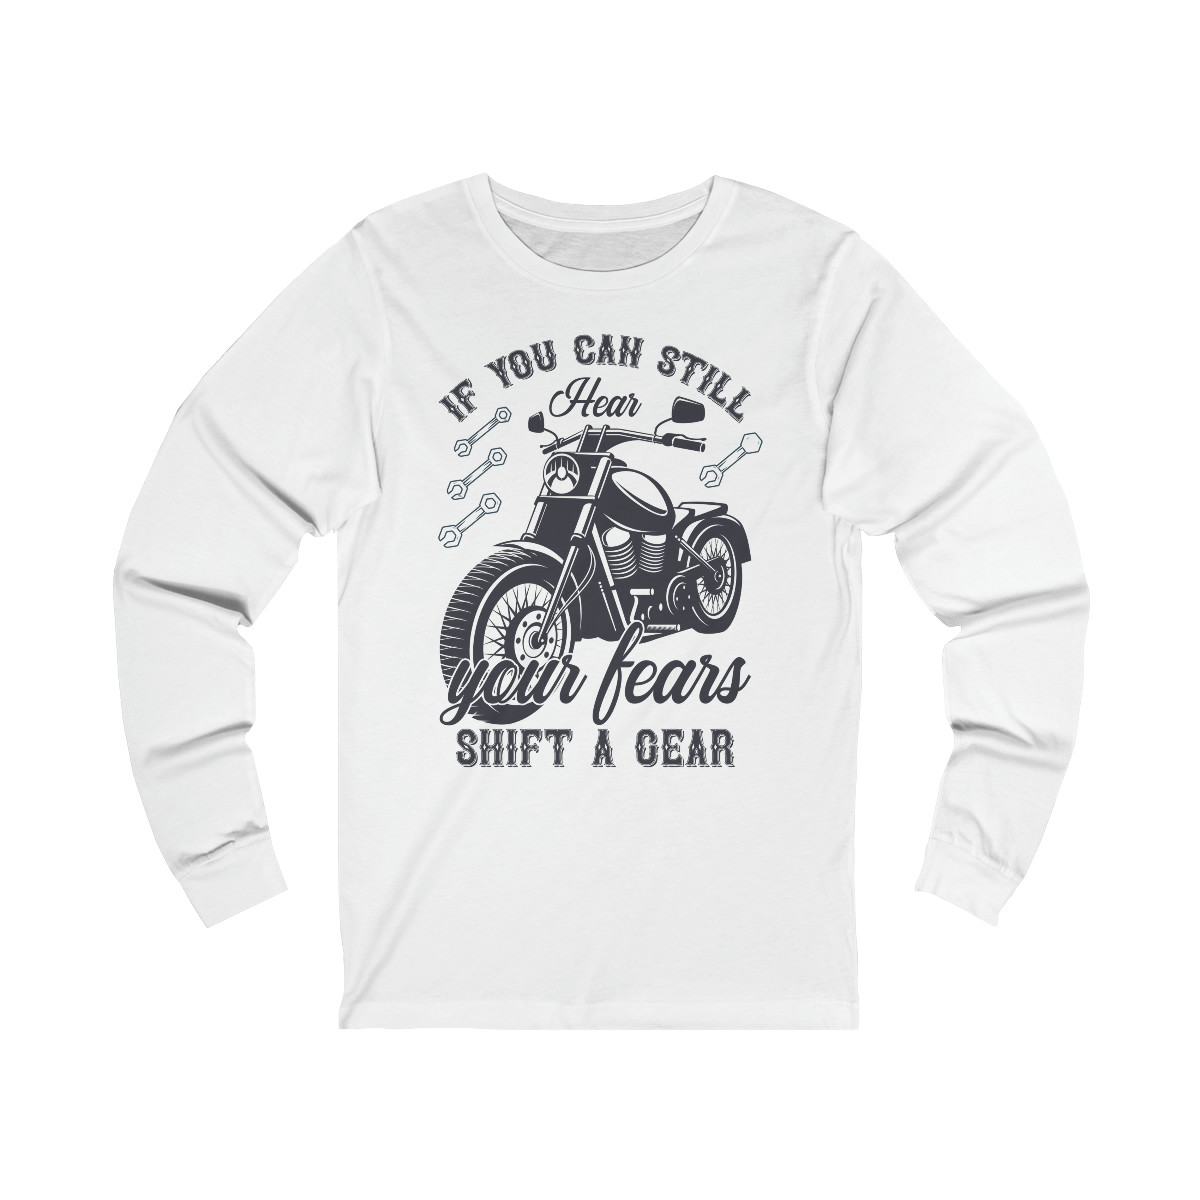 If You Can Still Hear Your Fears Shift Gears Unisex Jersey Long Sleeve Tee